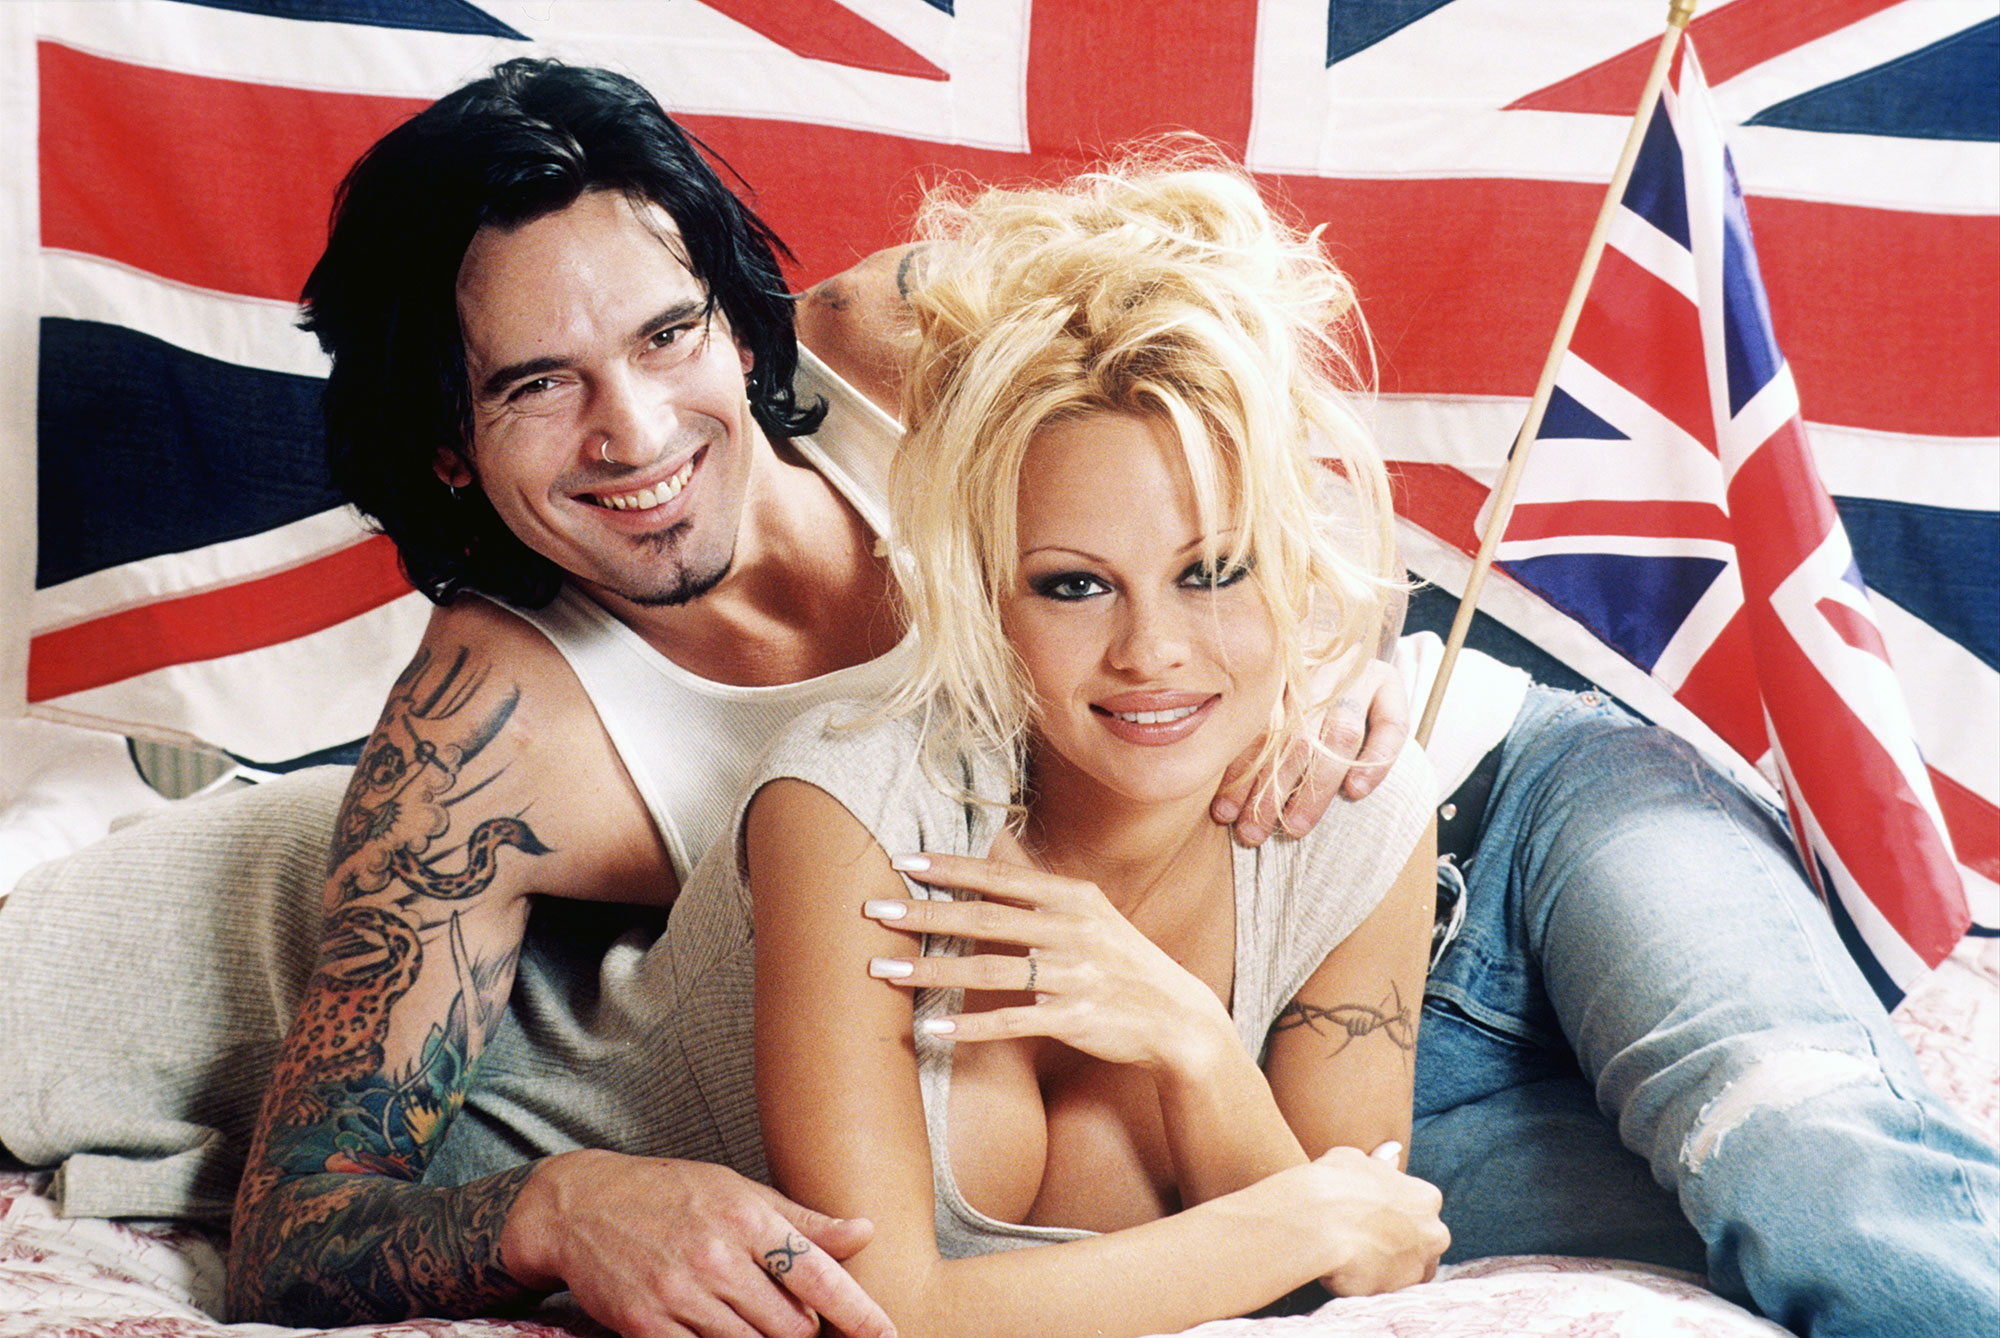 Pamela Anderson's Dating History: From Tommy Lee to Jon Peters